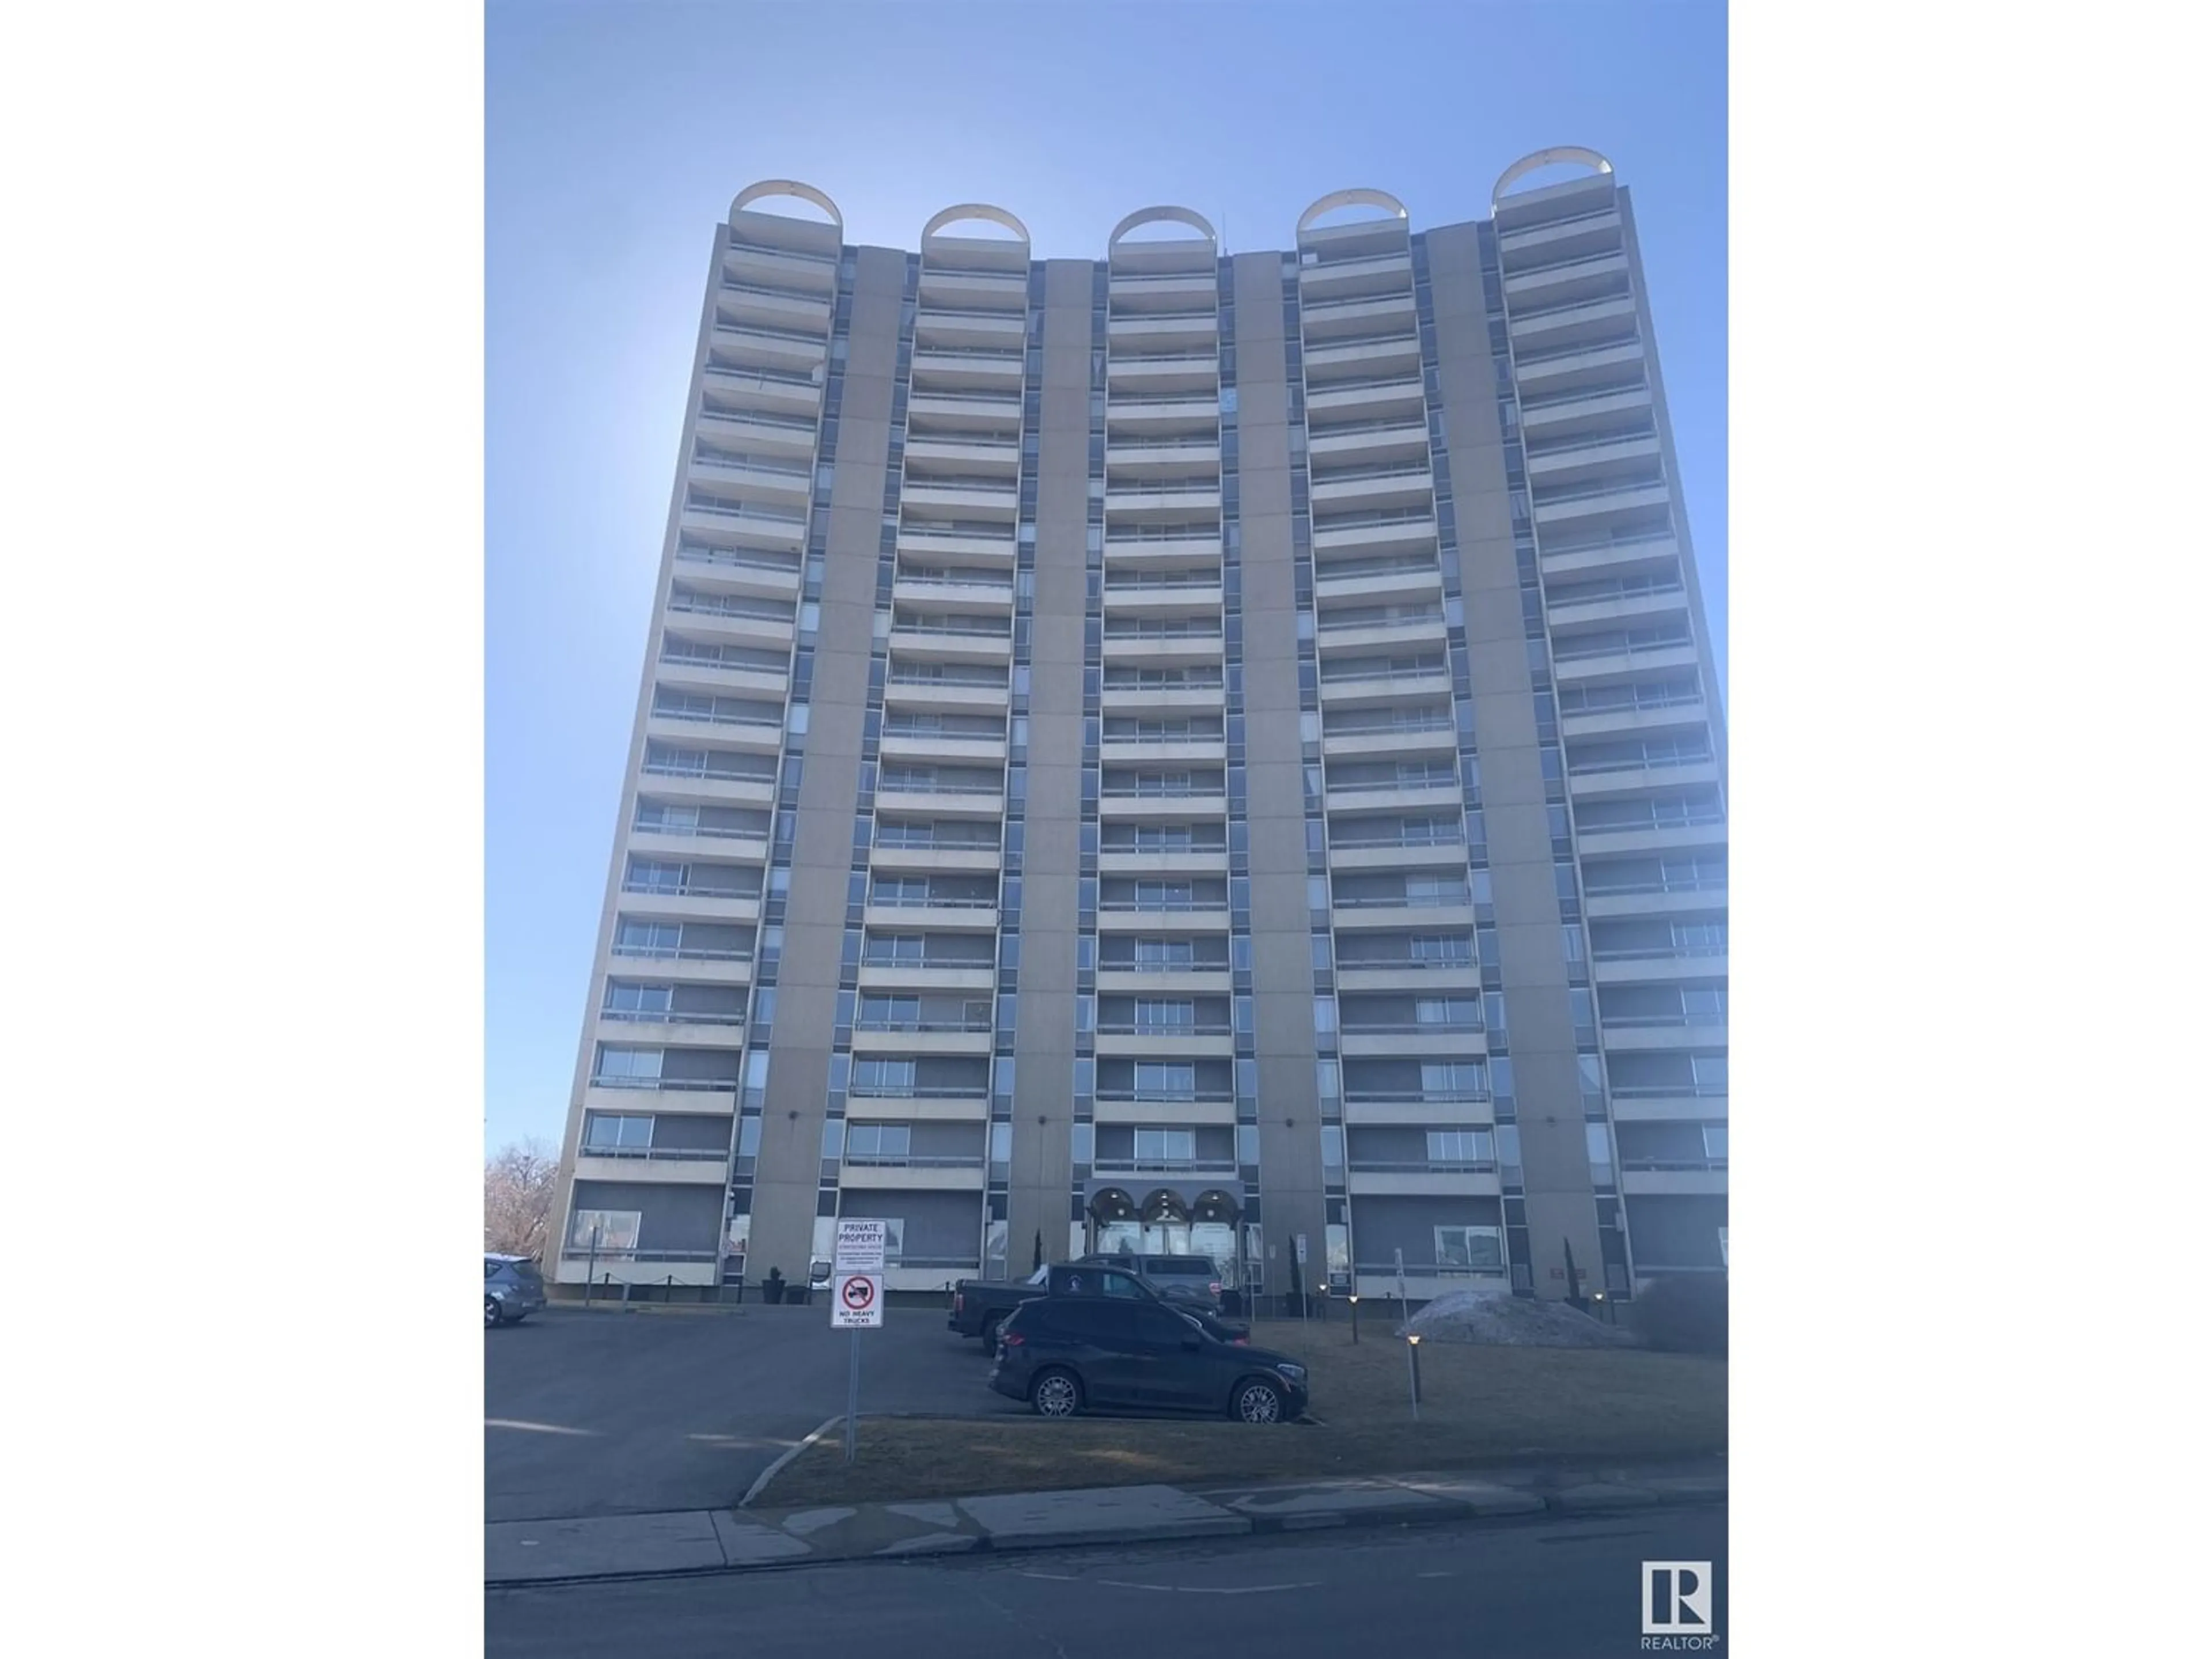 A pic from exterior of the house or condo for #1110 10883 SASKATCHEWAN DR NW, Edmonton Alberta T6E4S6